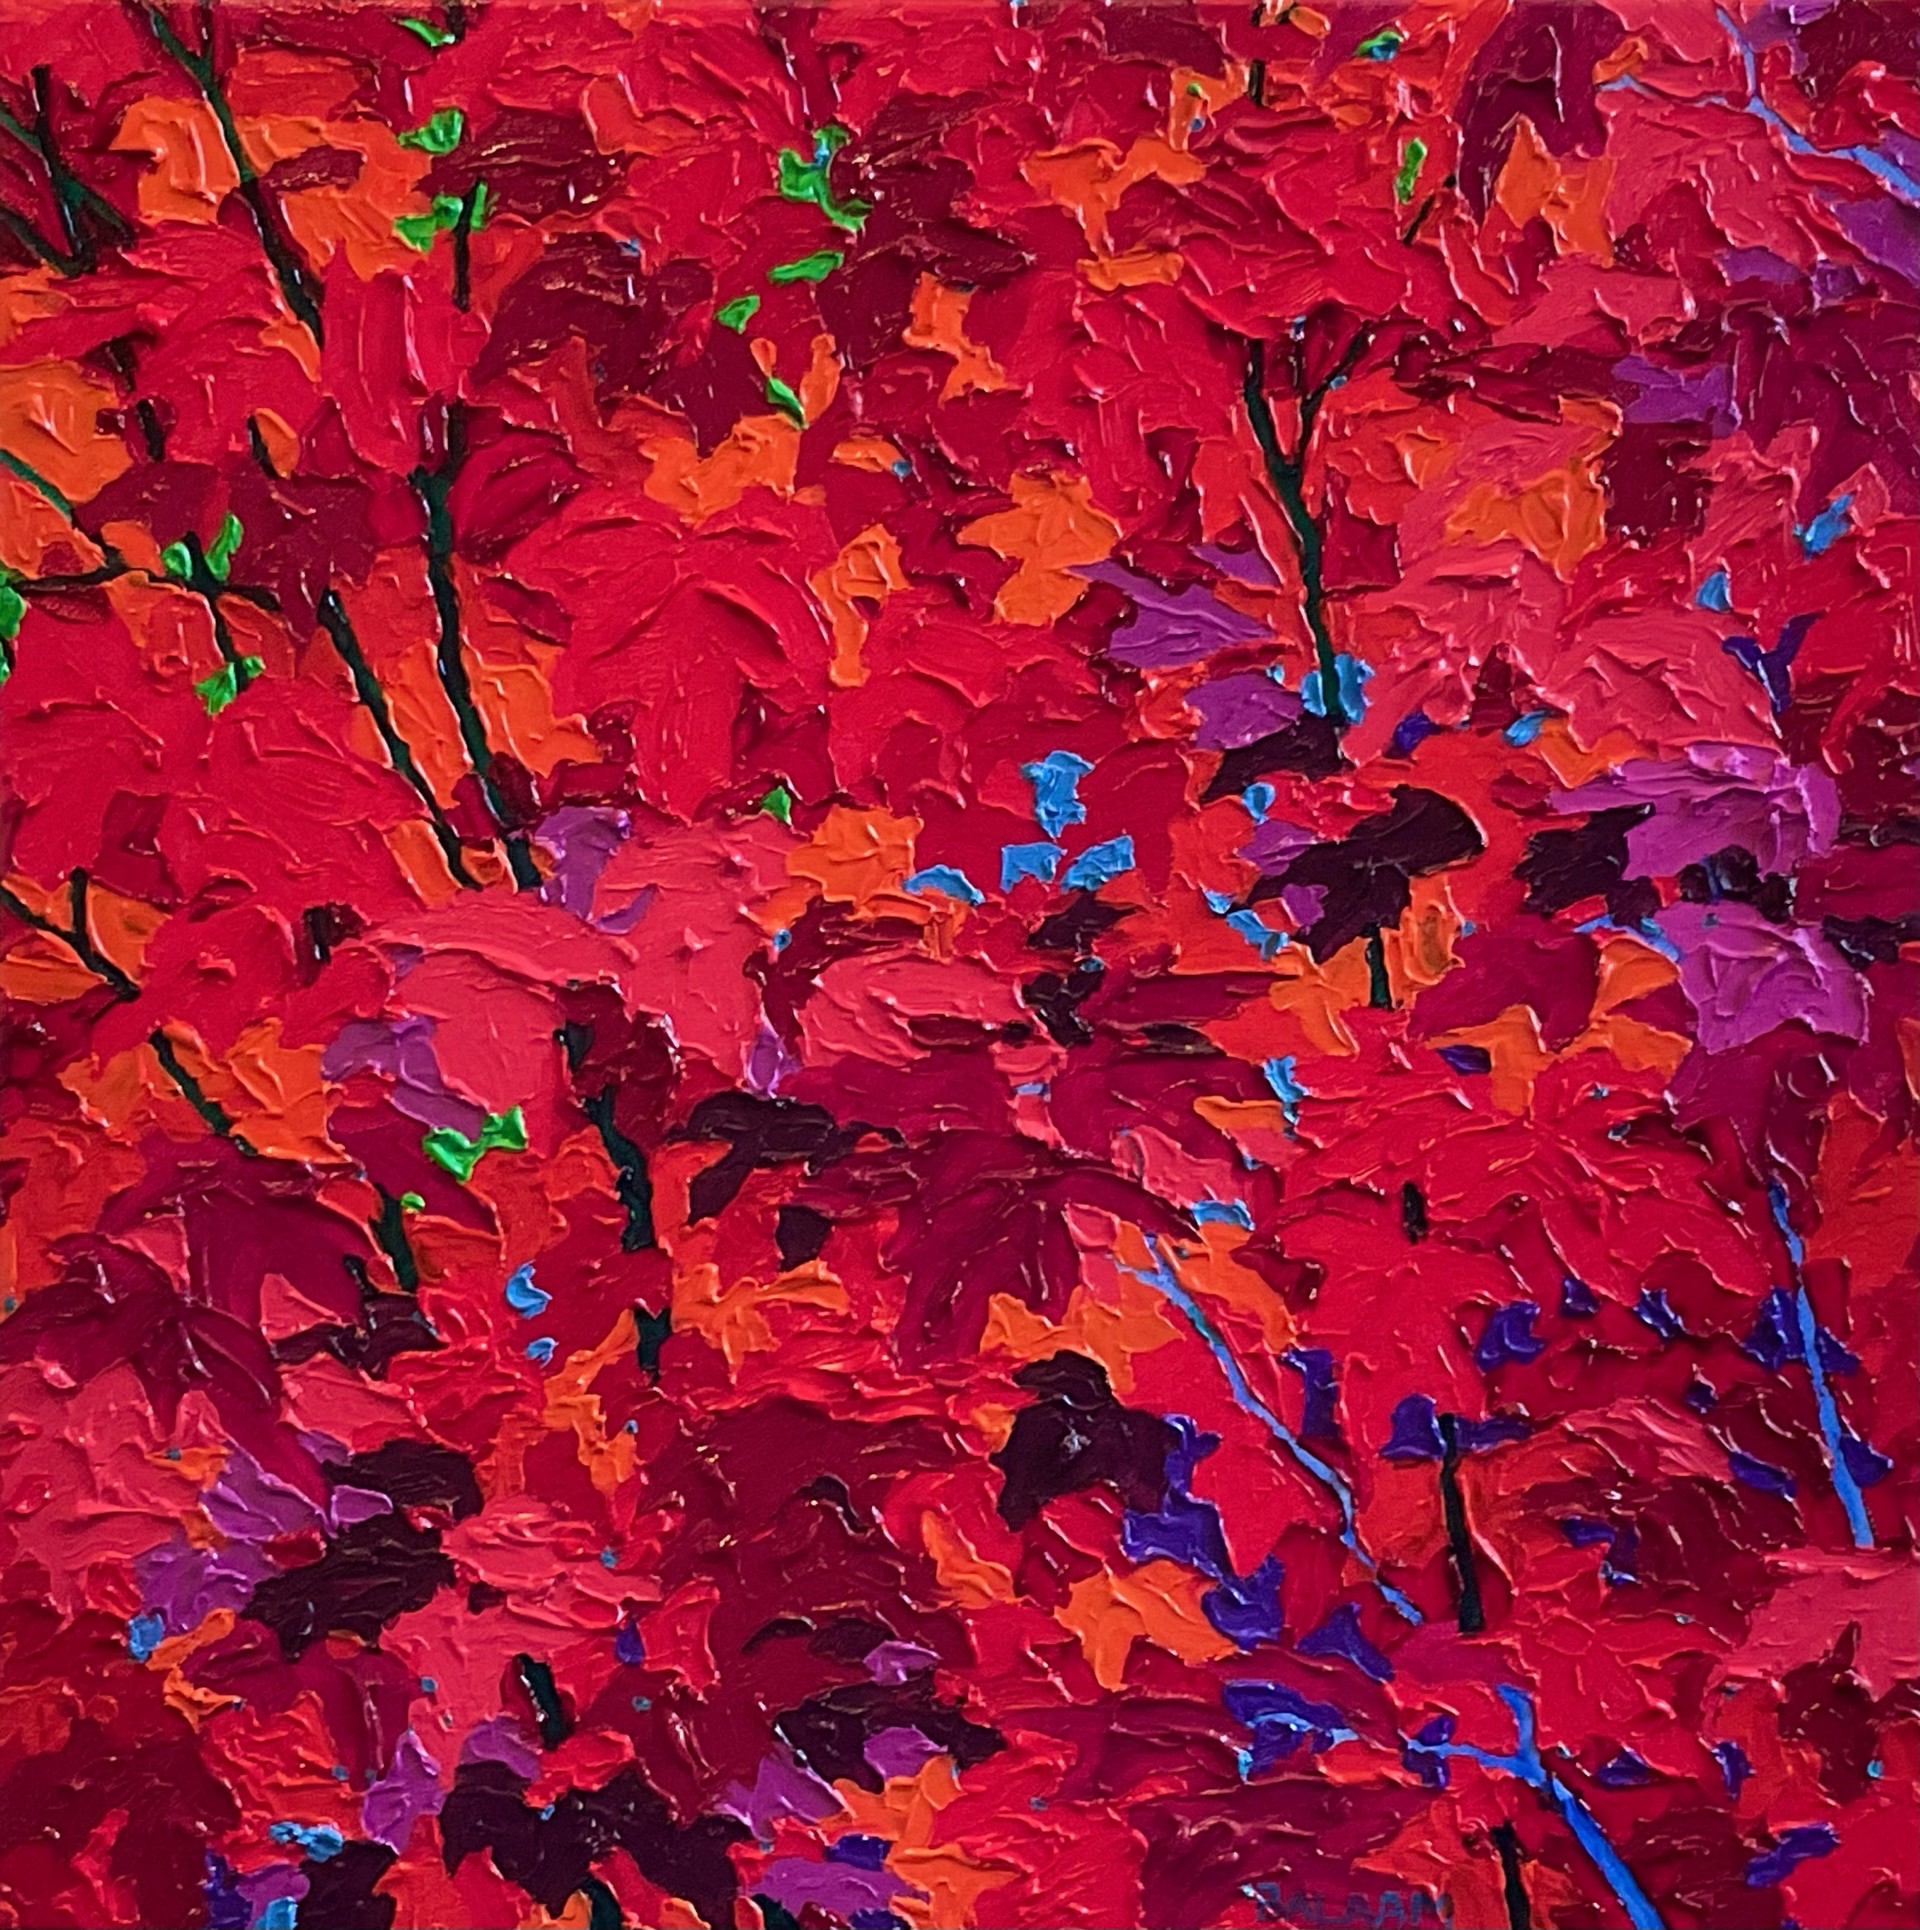 Autumn Maple Passion by Frank Balaam